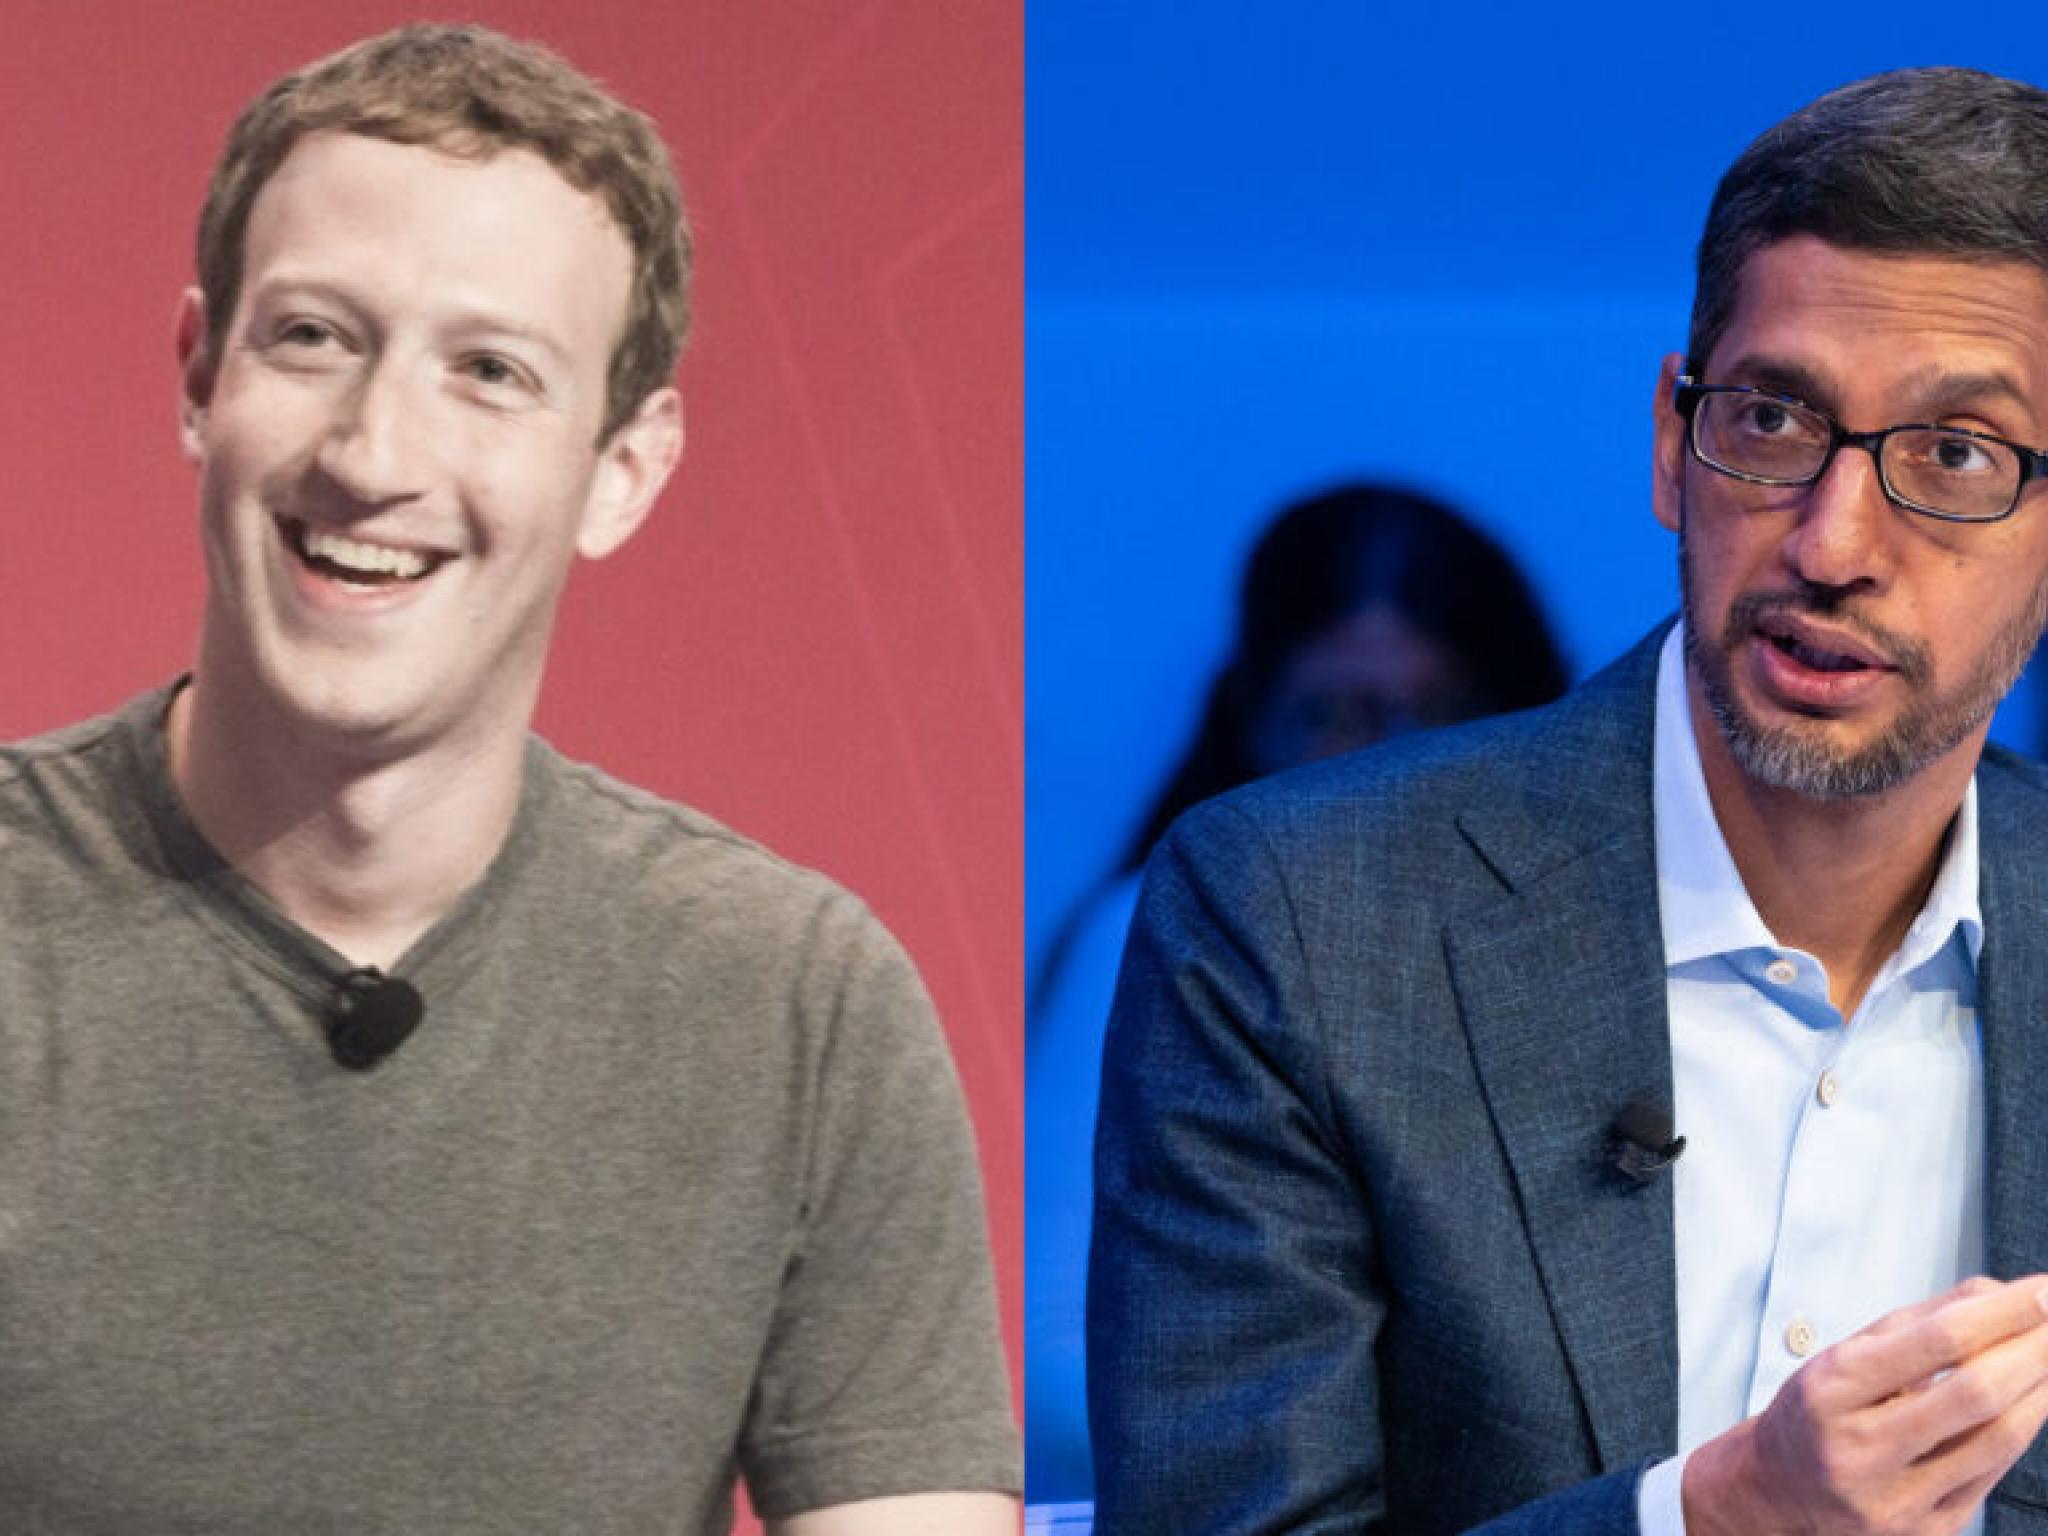 Microsoft And Oracle Could Be TikTok’s ‘Likely Buyers,’ But Real Winners Would Be Mark Zuckerberg And Sundar Pichai